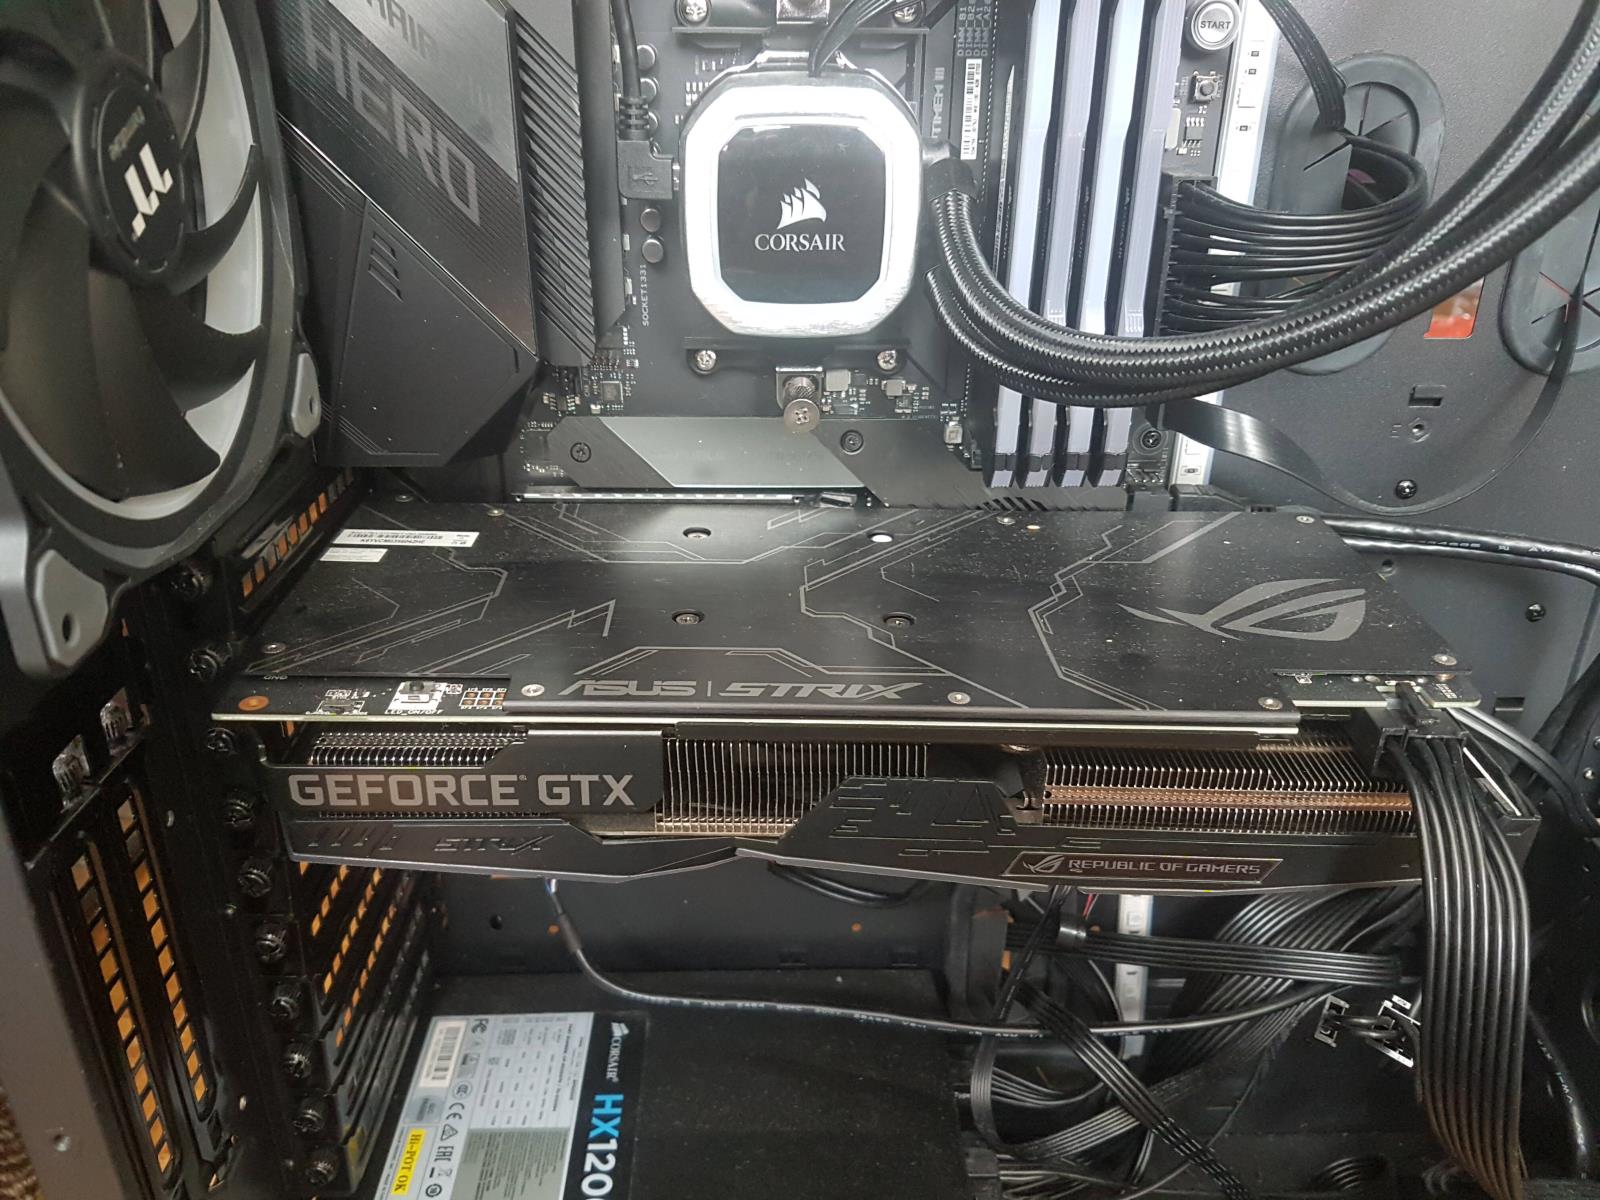 How To Remove Gpu From Motherboard